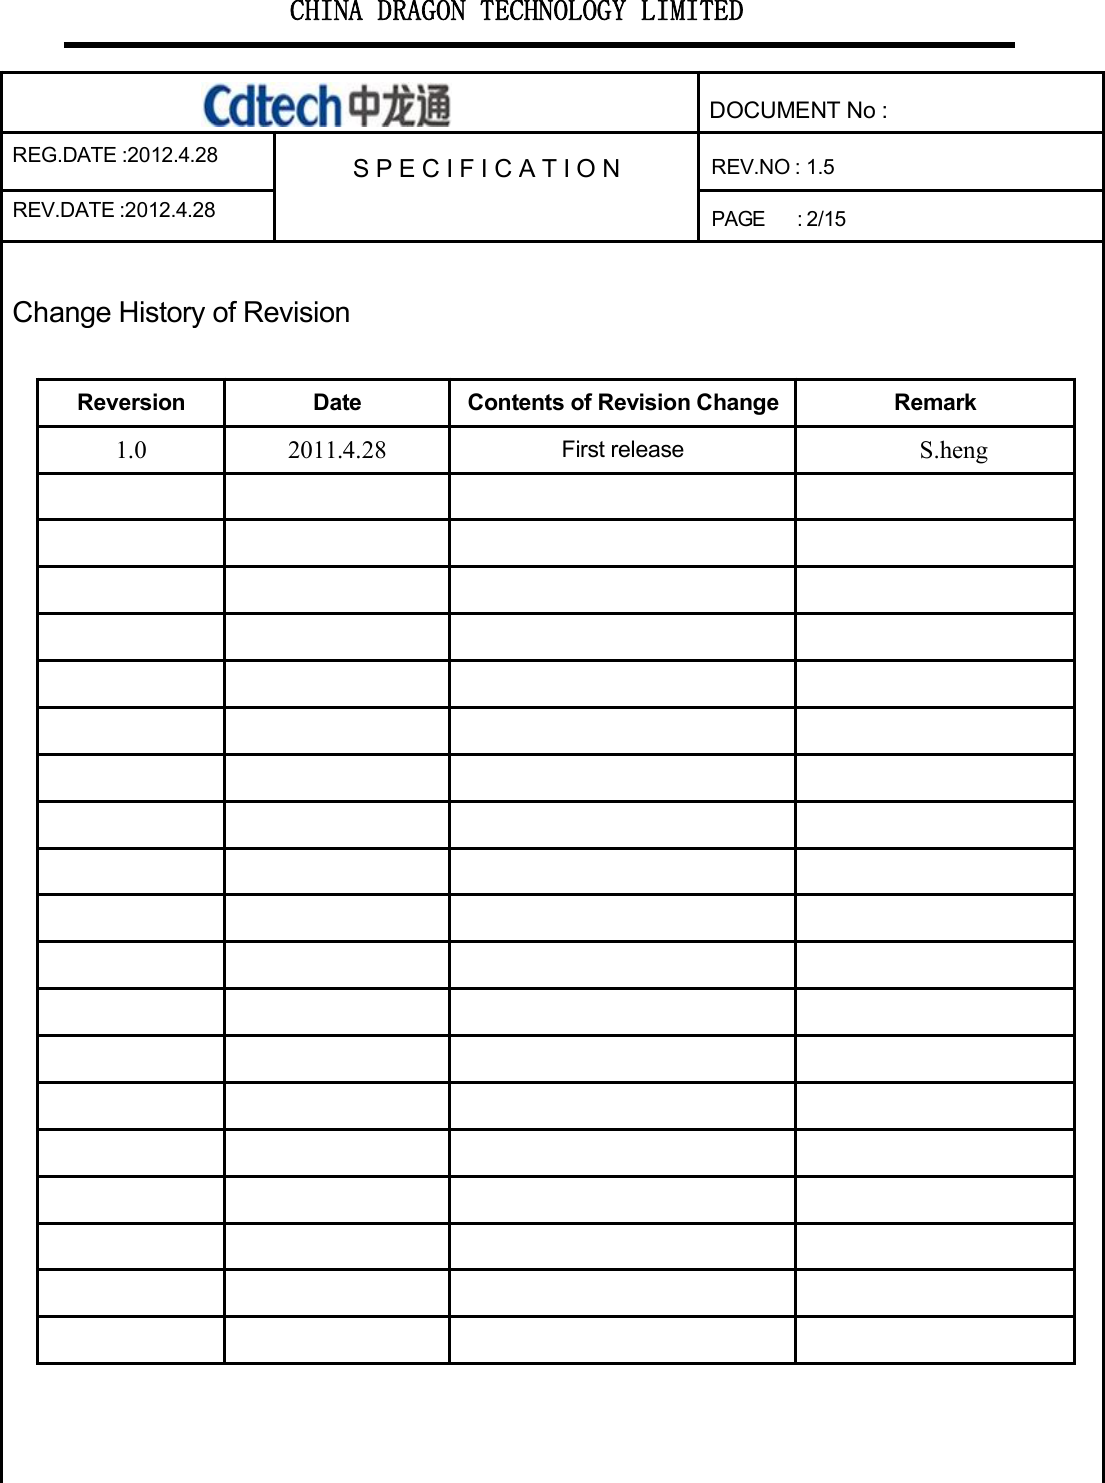 CHINA DRAGON TECHNOLOGY LIMITEDDOCUMENT No :REG.DATE :2012.4.28 S P E C I F I CAT I O N REV.NO : 1.5REV.DATE :2012.4.28PAGE:2/15ChangeHistoryofRevisionReversion Date Contents of Revision Change Remark1.0 2011.4.28 First release S.heng